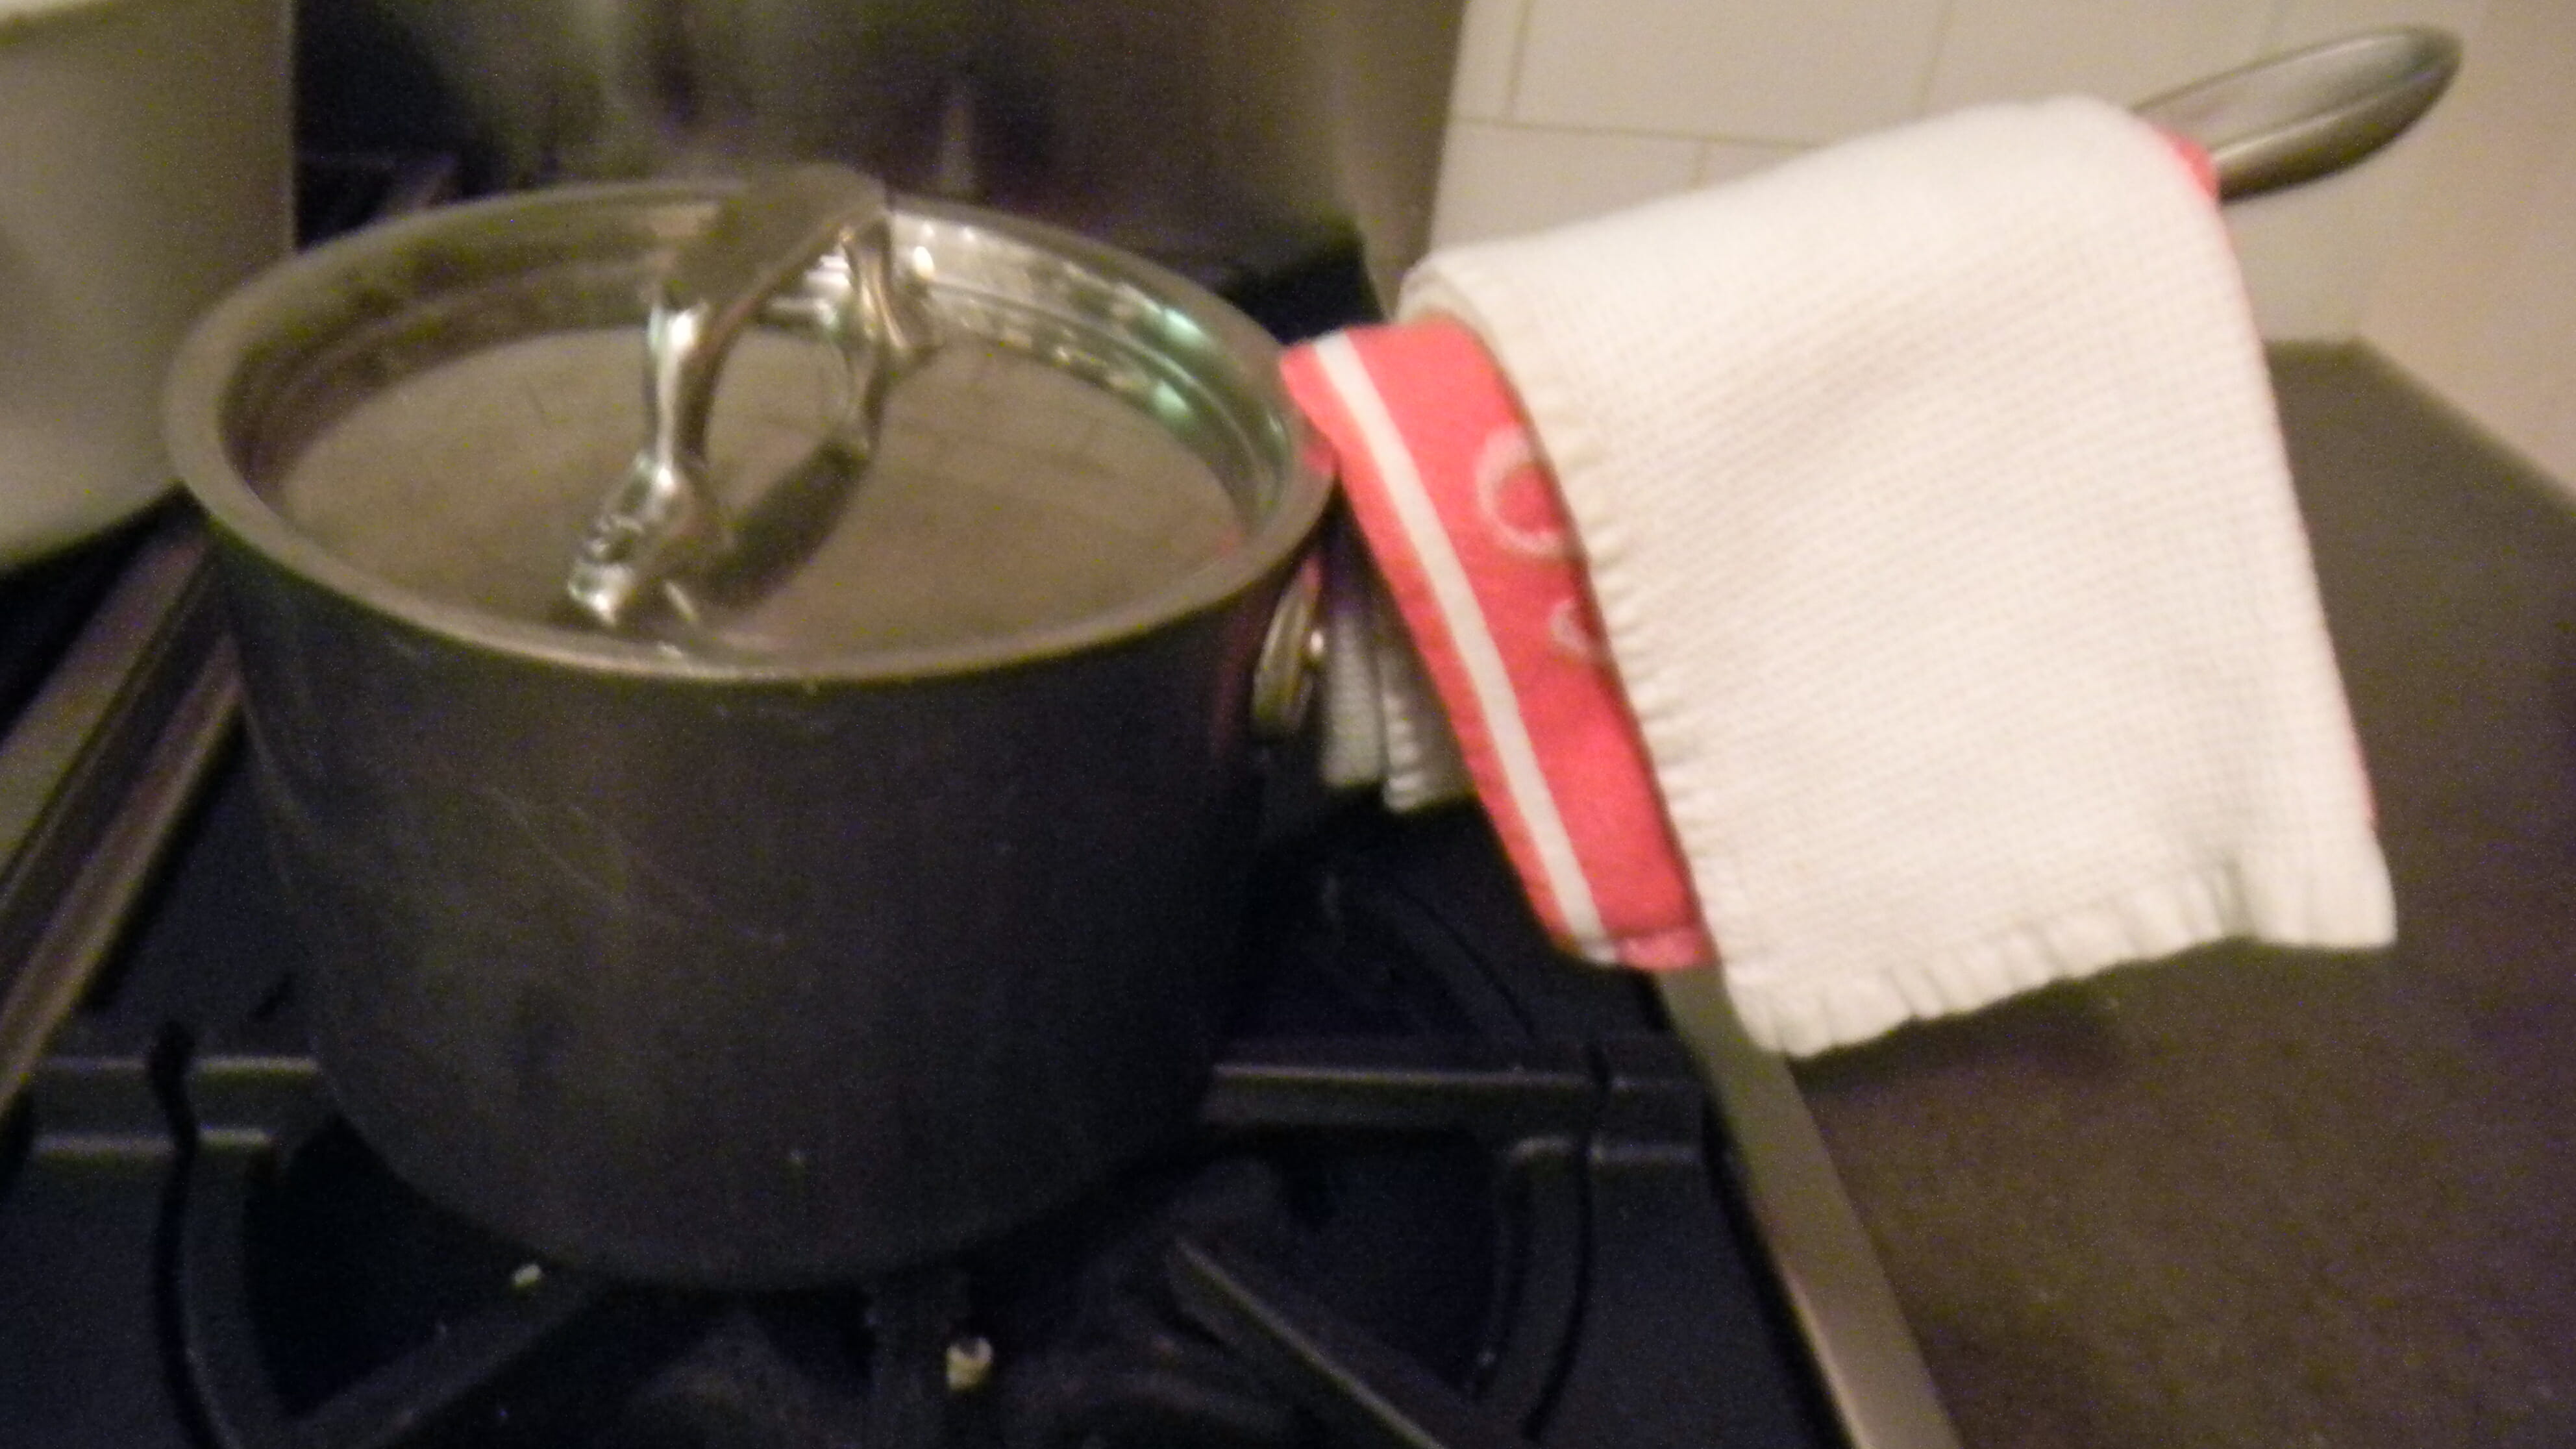 Hot Pan Holder Microwave: Keep Your Hands Safe From Heat! - Velan Store